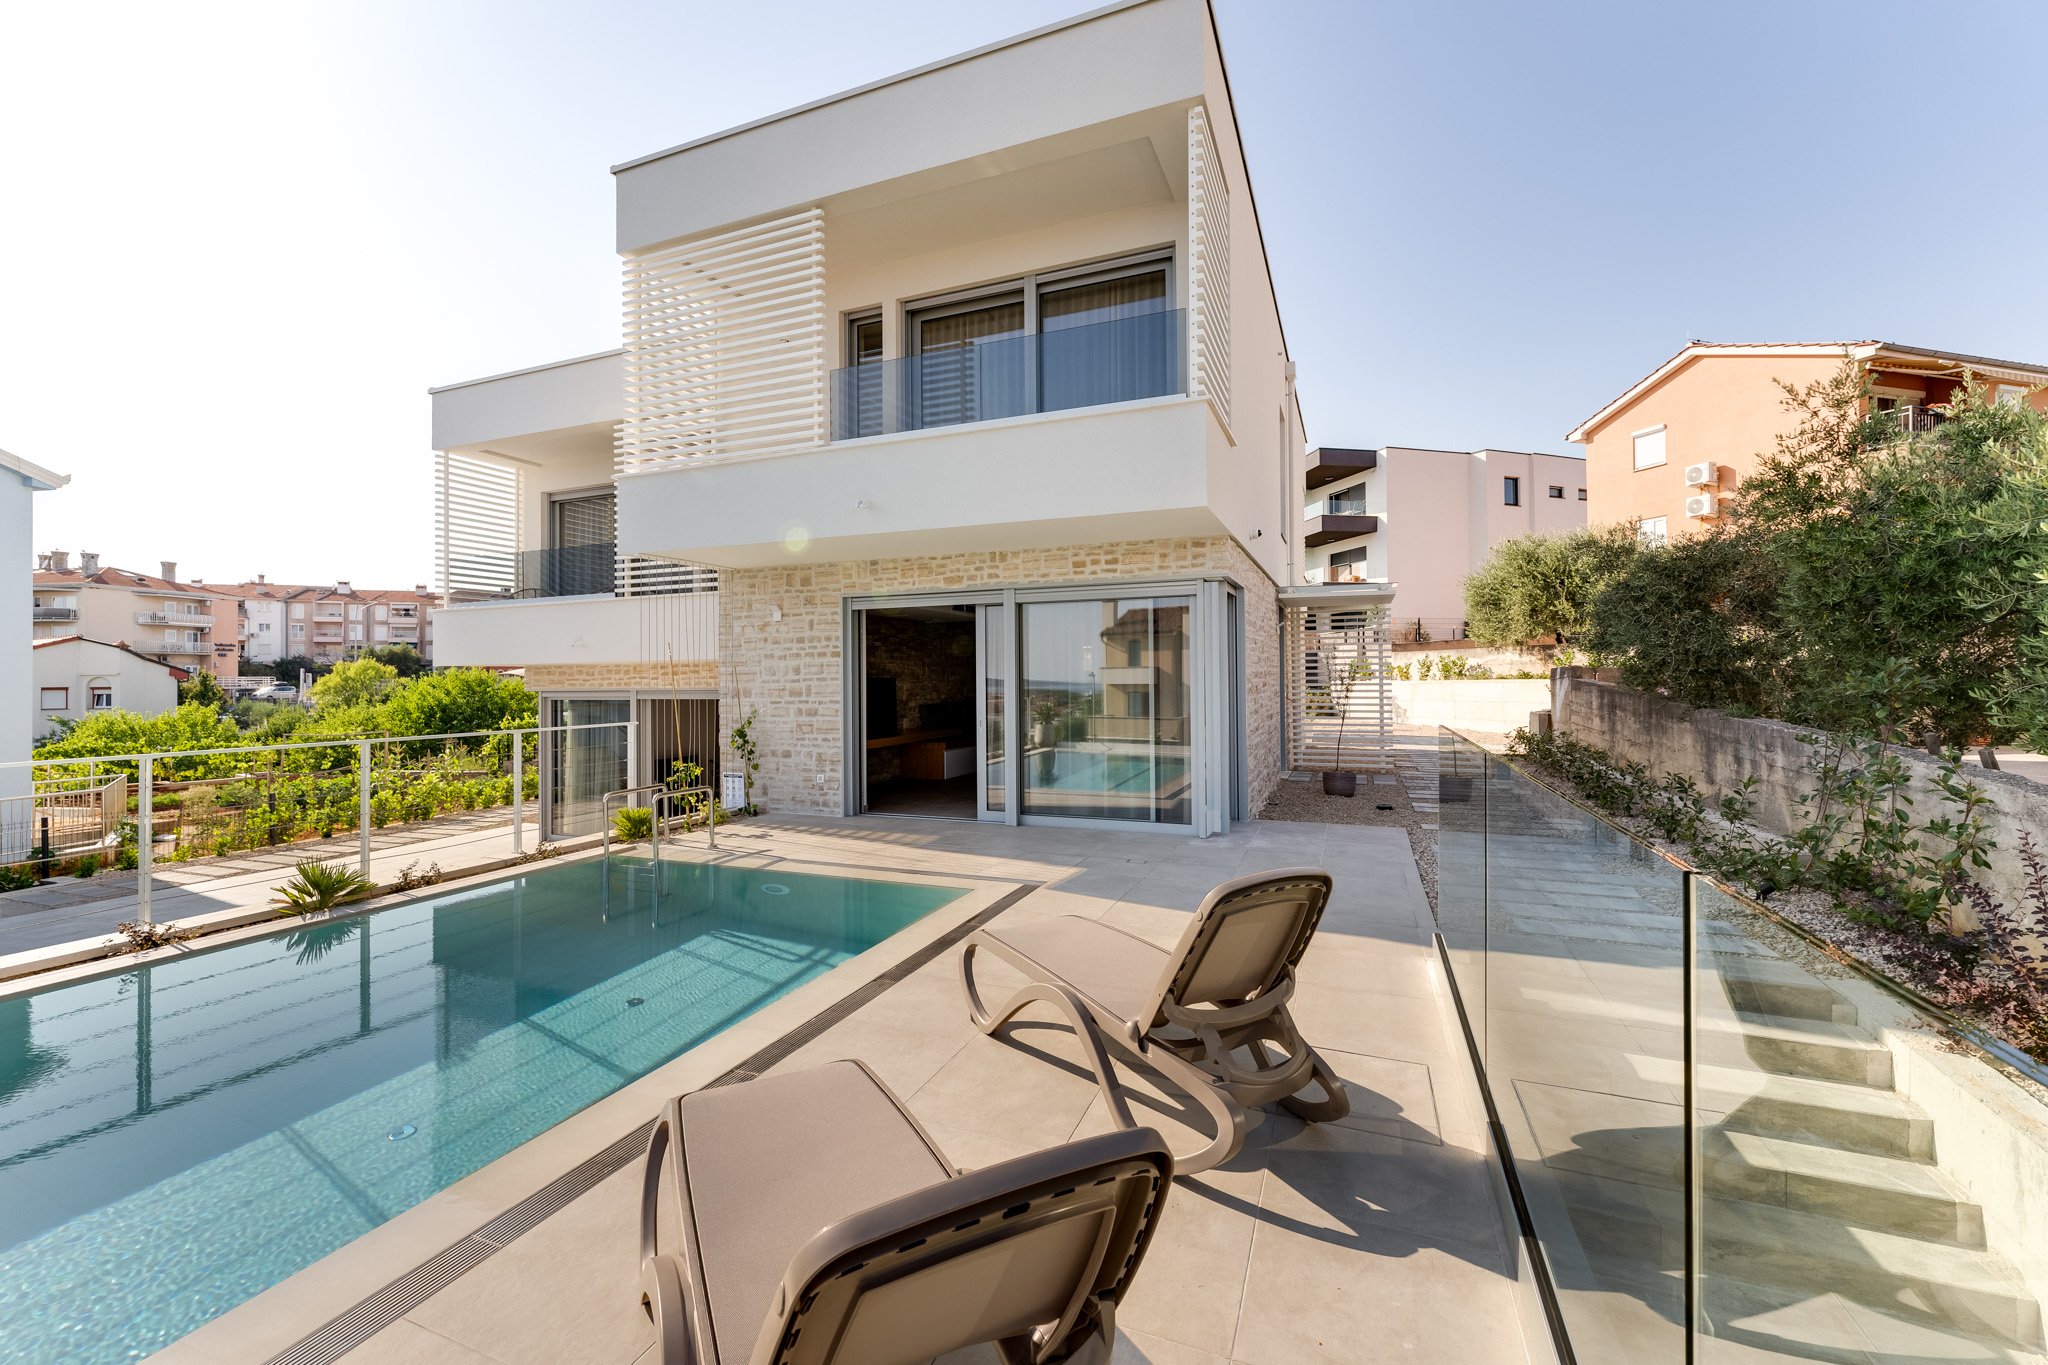 Smokva 2 -new modern villa with pool, near the center and the beach